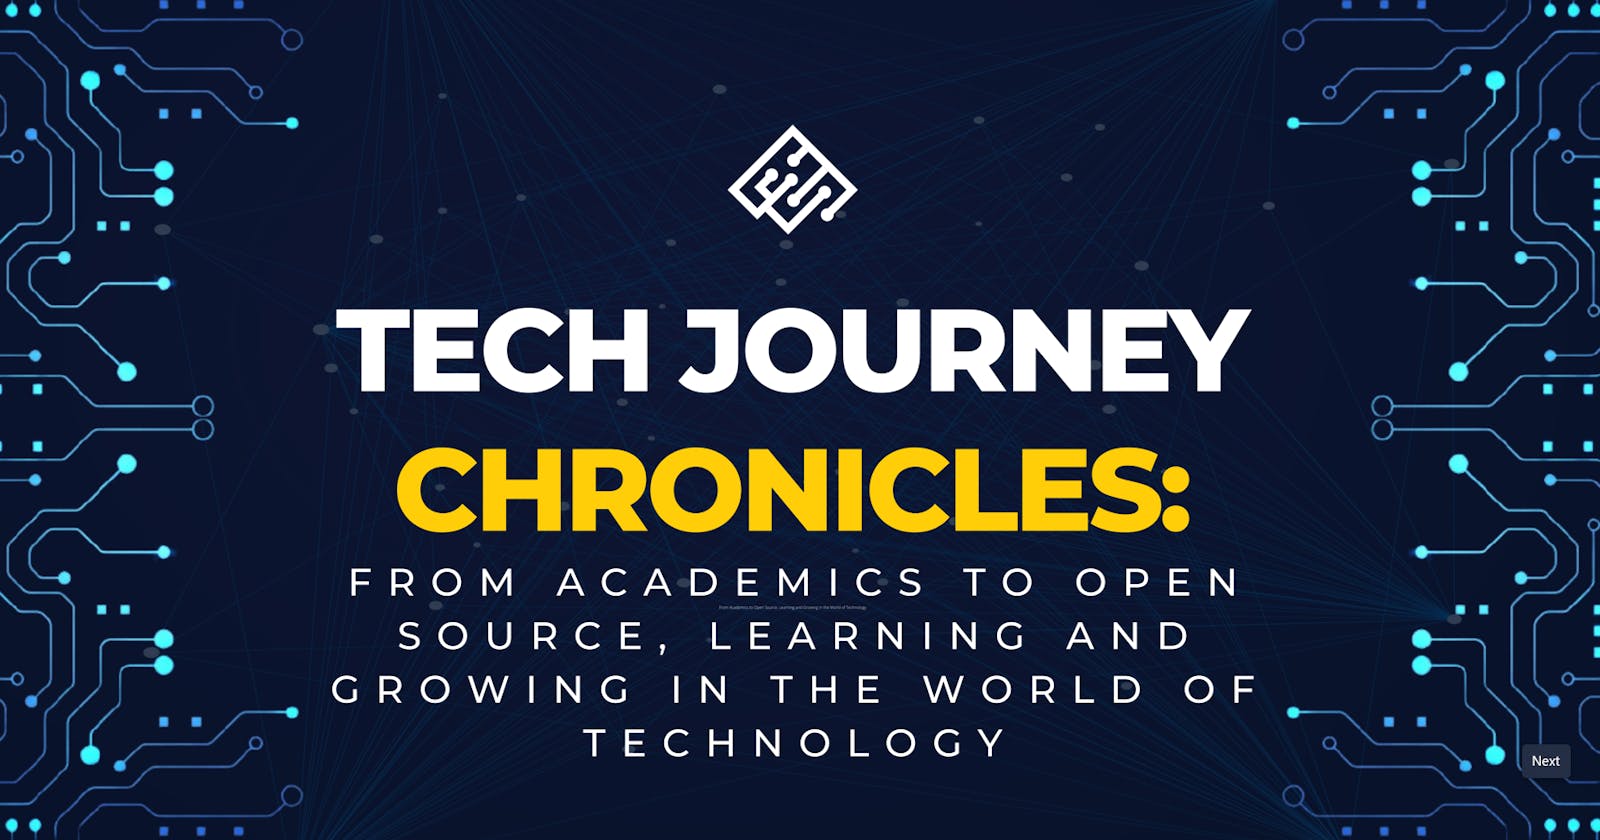 "Tech Journey Chronicles: From Academics to Open Source, Learning and Growing in the World of Technology"